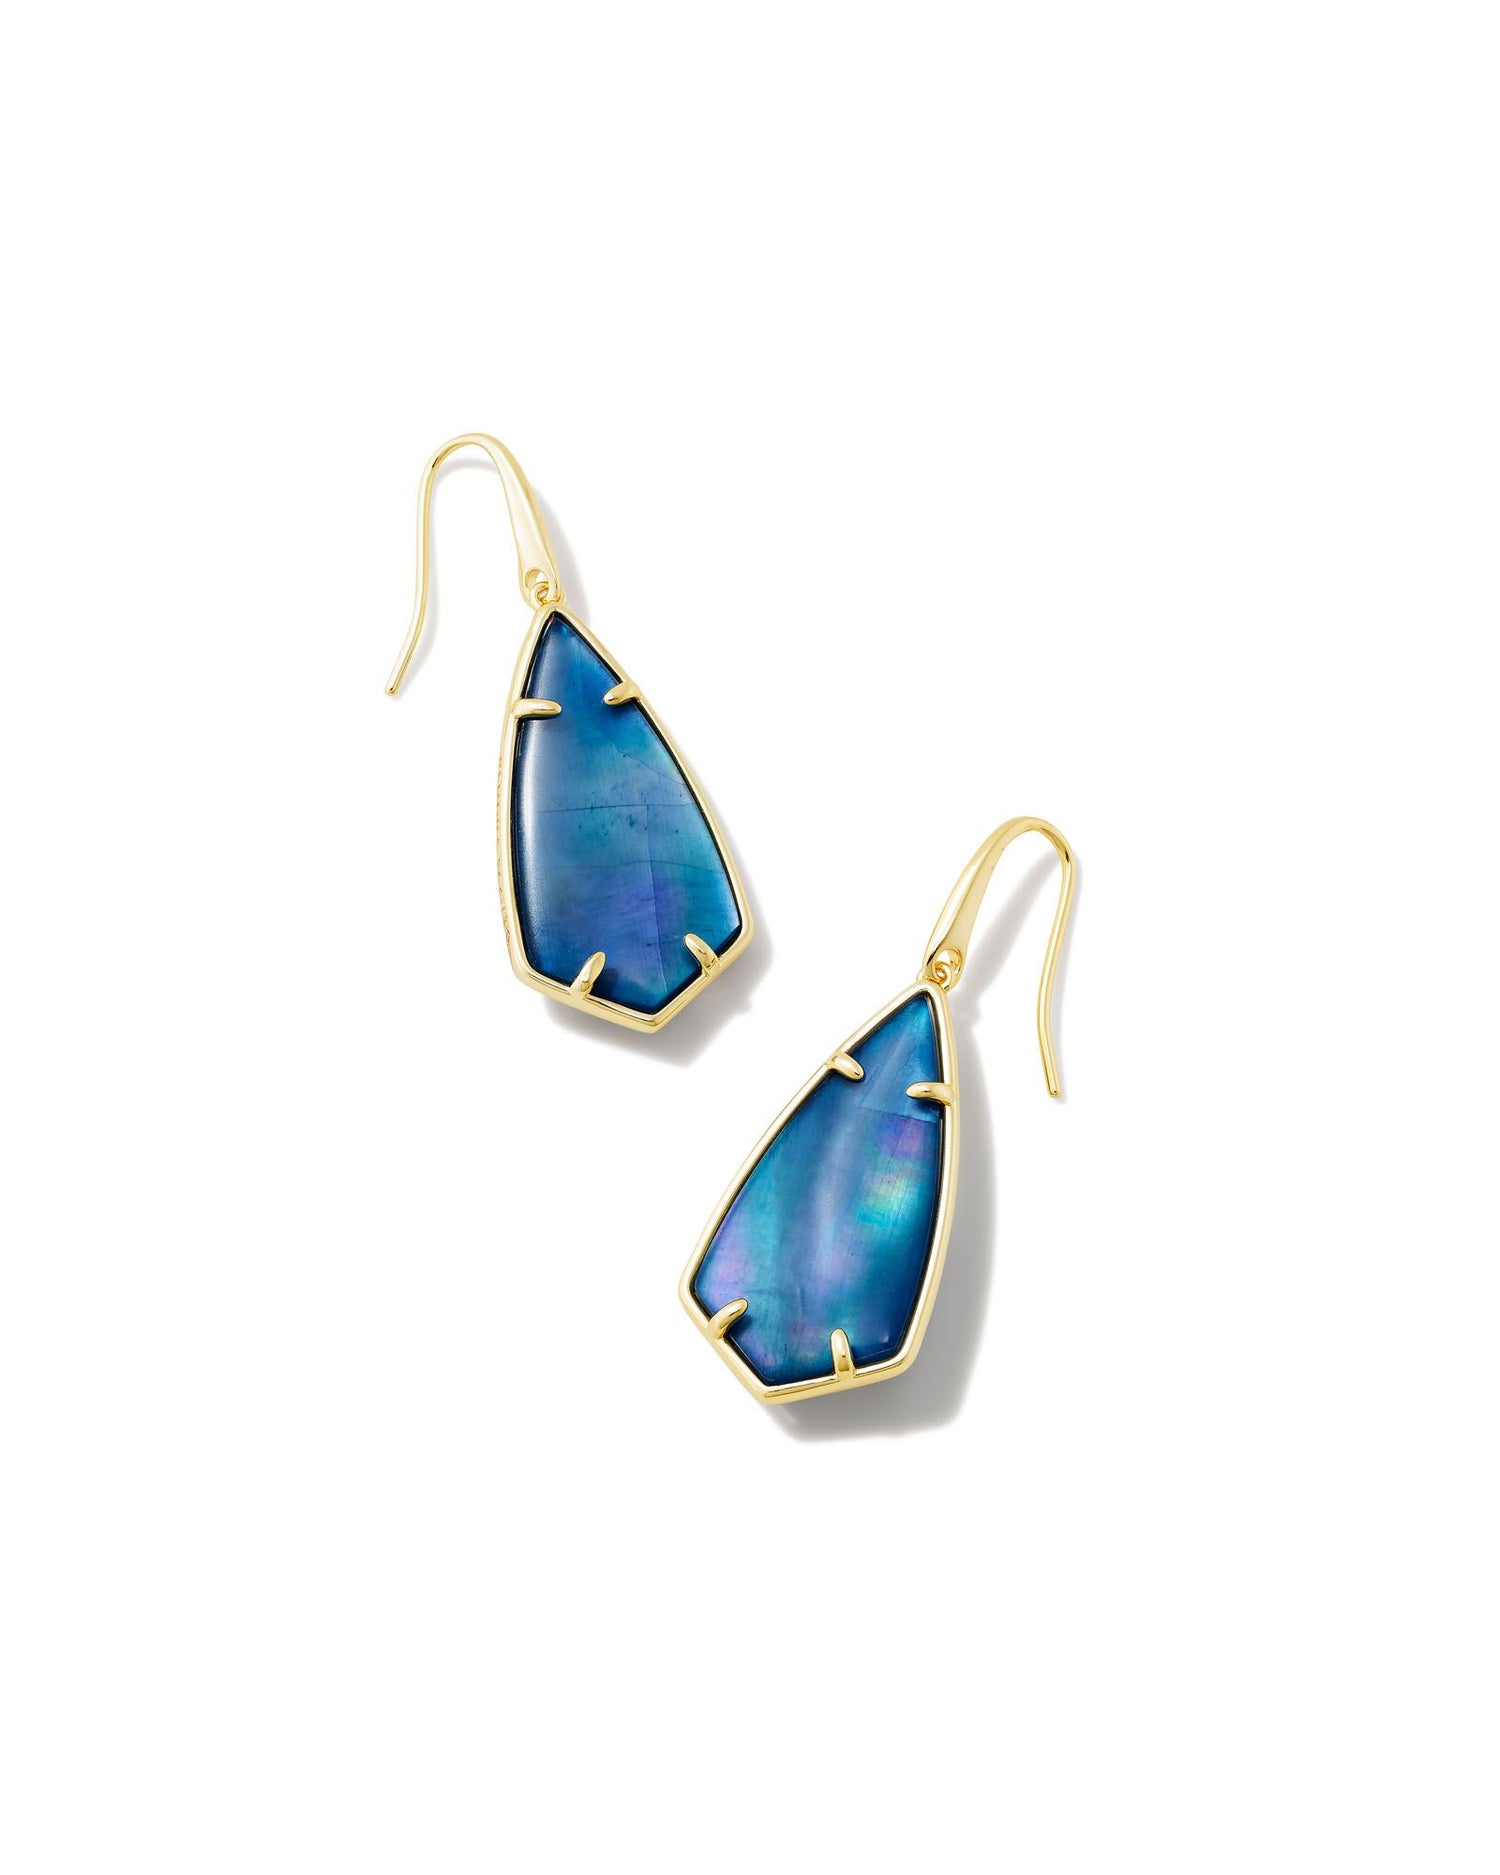 With their elongated, face-framing silhouette, the Camry Gold Drop Earrings look good on everyone. Featuring our archival Camry stone shape with a sleek new metal frame, these earrings add the finishing touch to any outfit. This metal is 24k gold plated over brass with deep blue mother of pearl stones. 